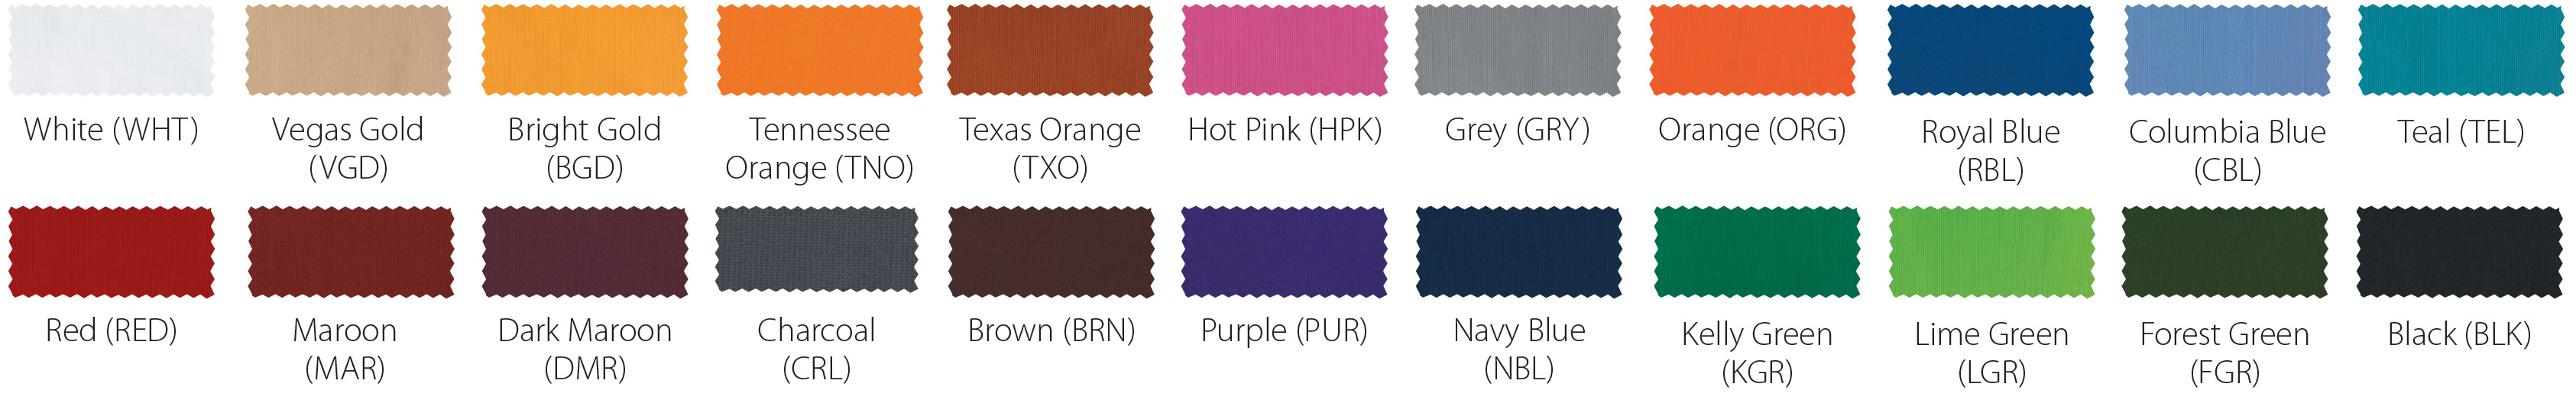 Poly Swatch Colors